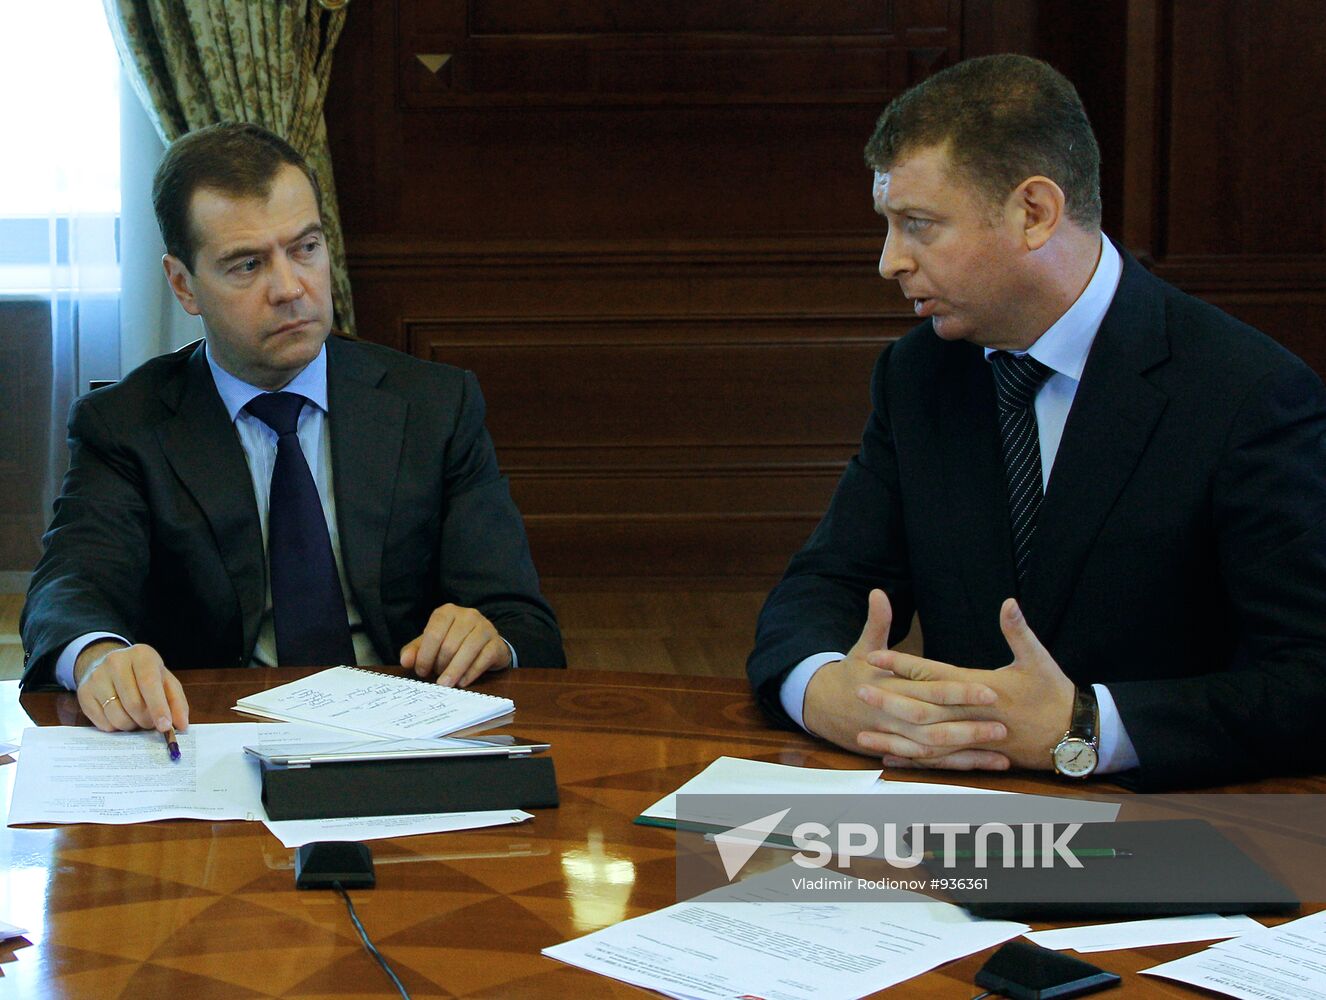 Dmitry Medvedev meets with heads of trade unions